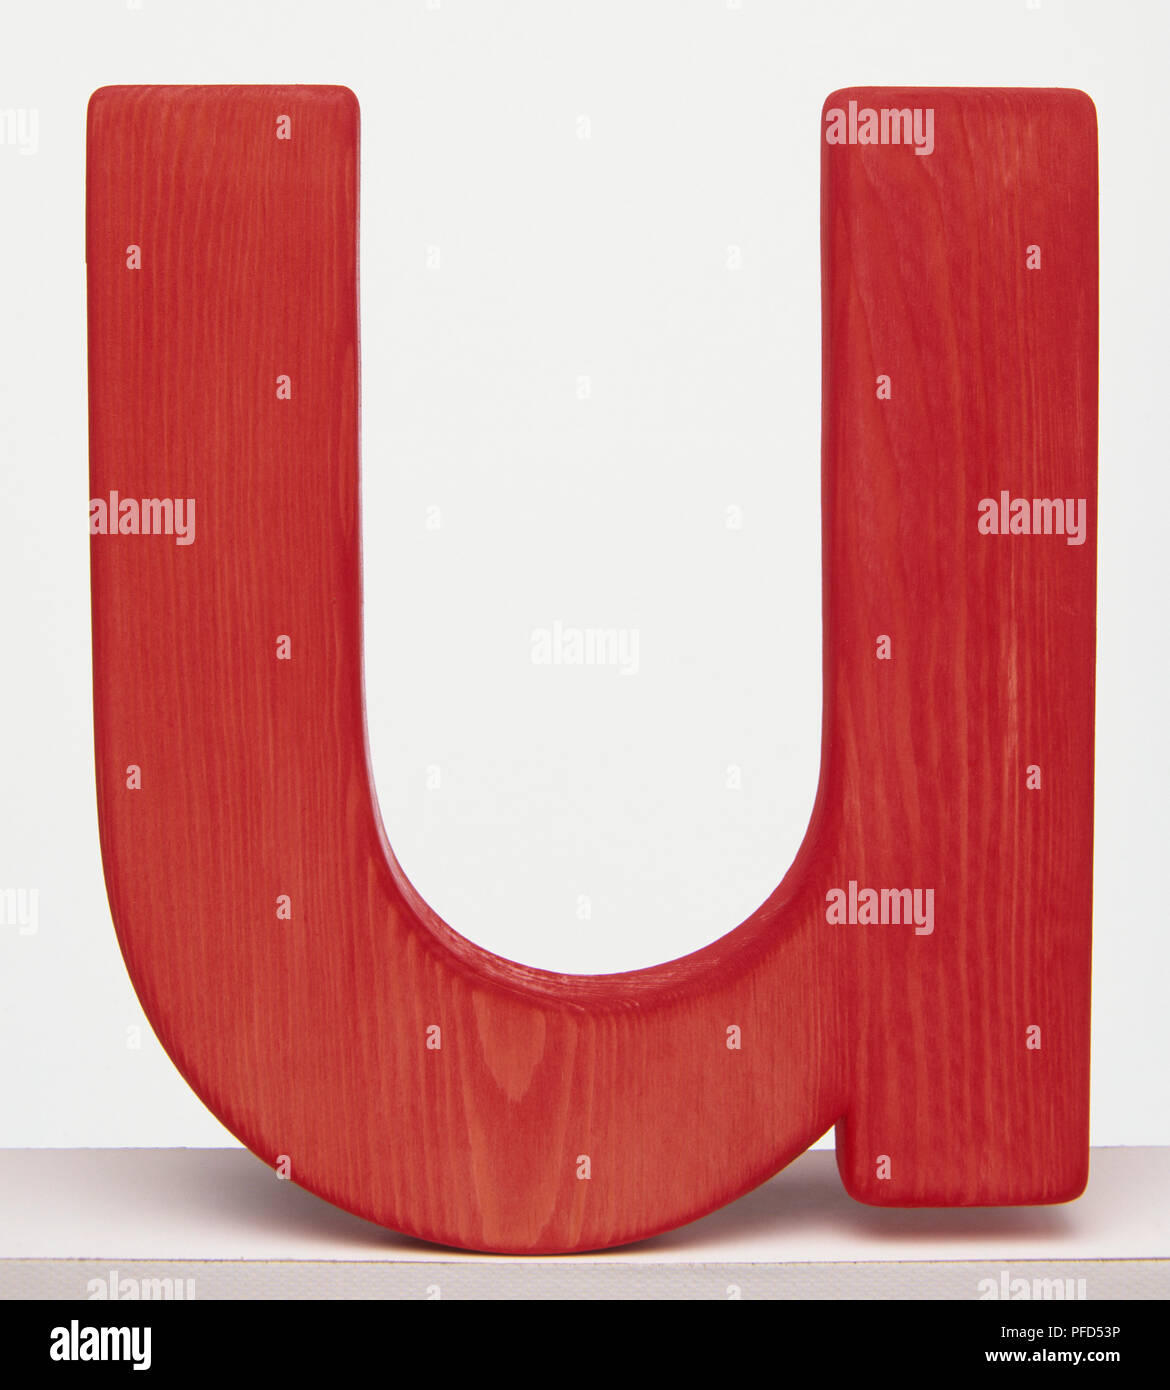 Red wooden letter 'u' Stock Photo